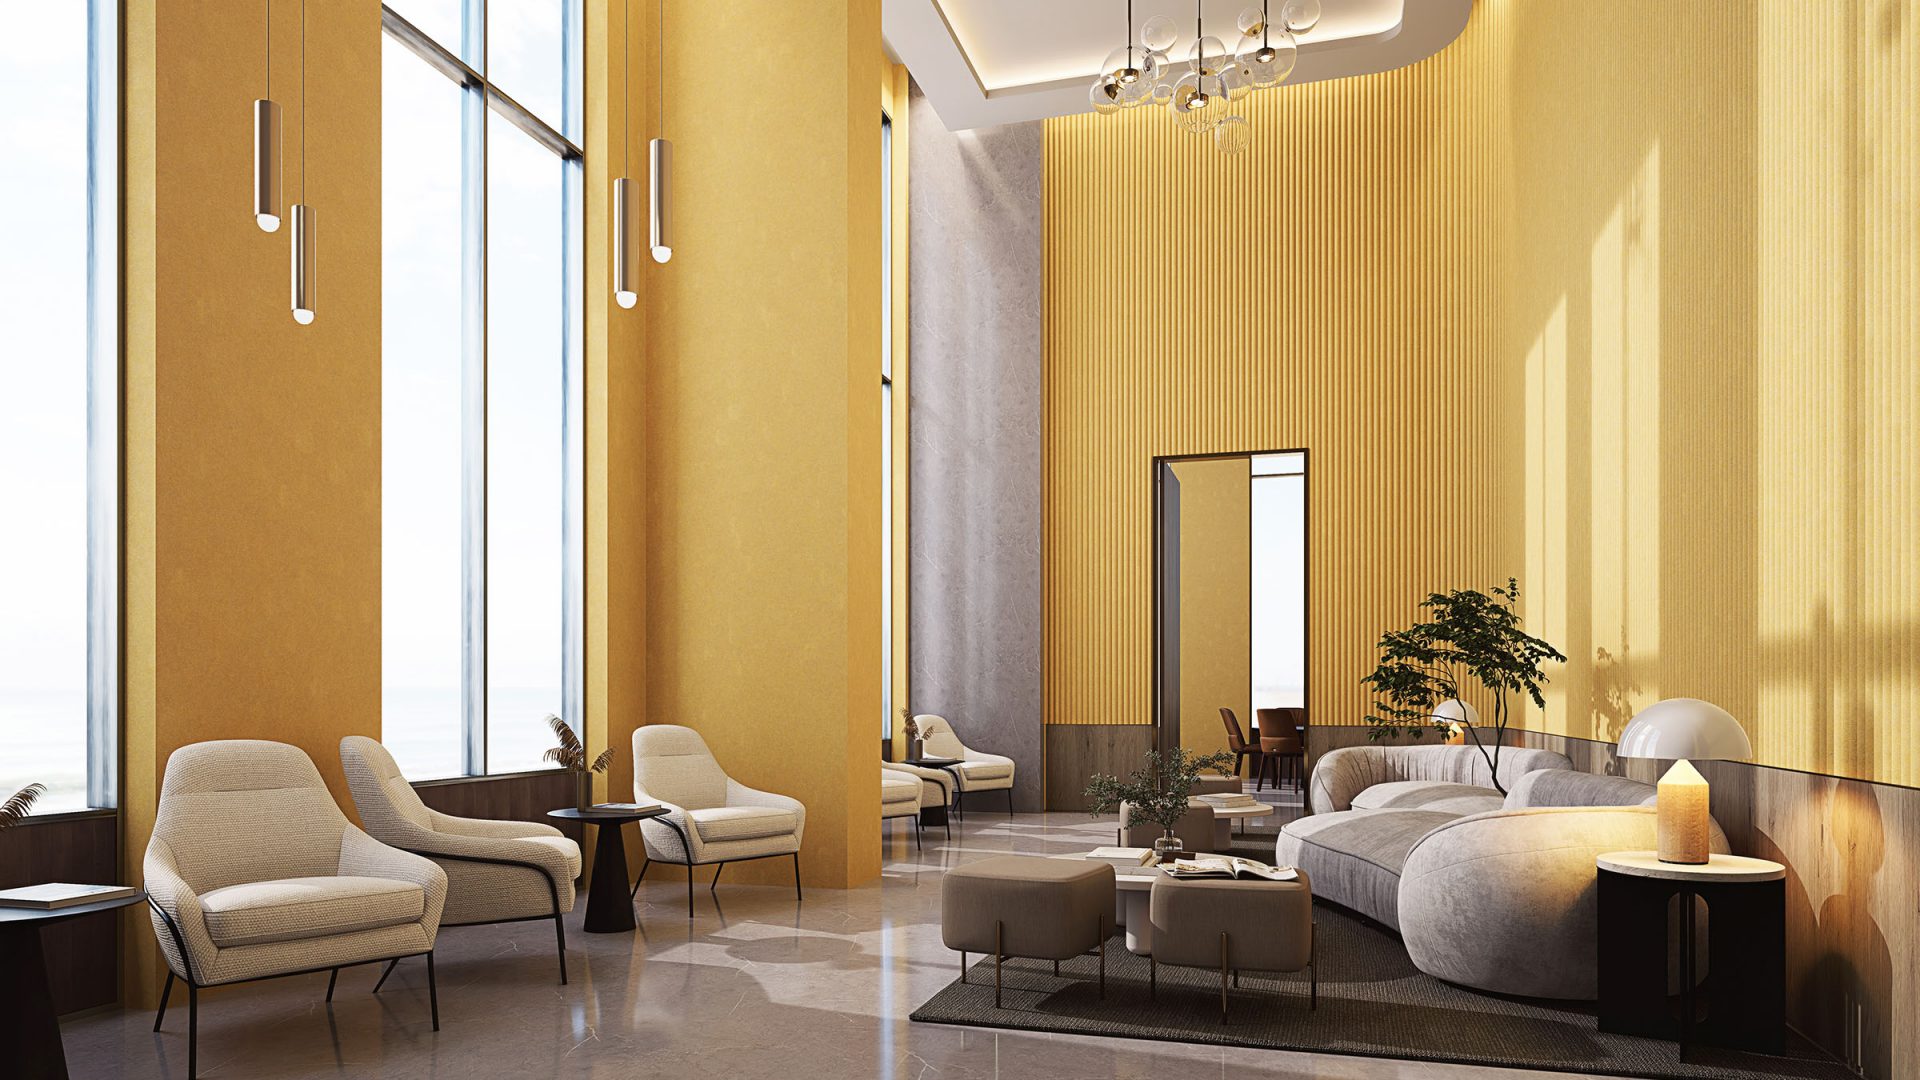 Spacious and elegant modern lobby featuring high ceilings and large windows, luxurious beige and white furniture, chic lighting fixtures, and acoustic wall panels in Wheat for a quiet atmosphere.